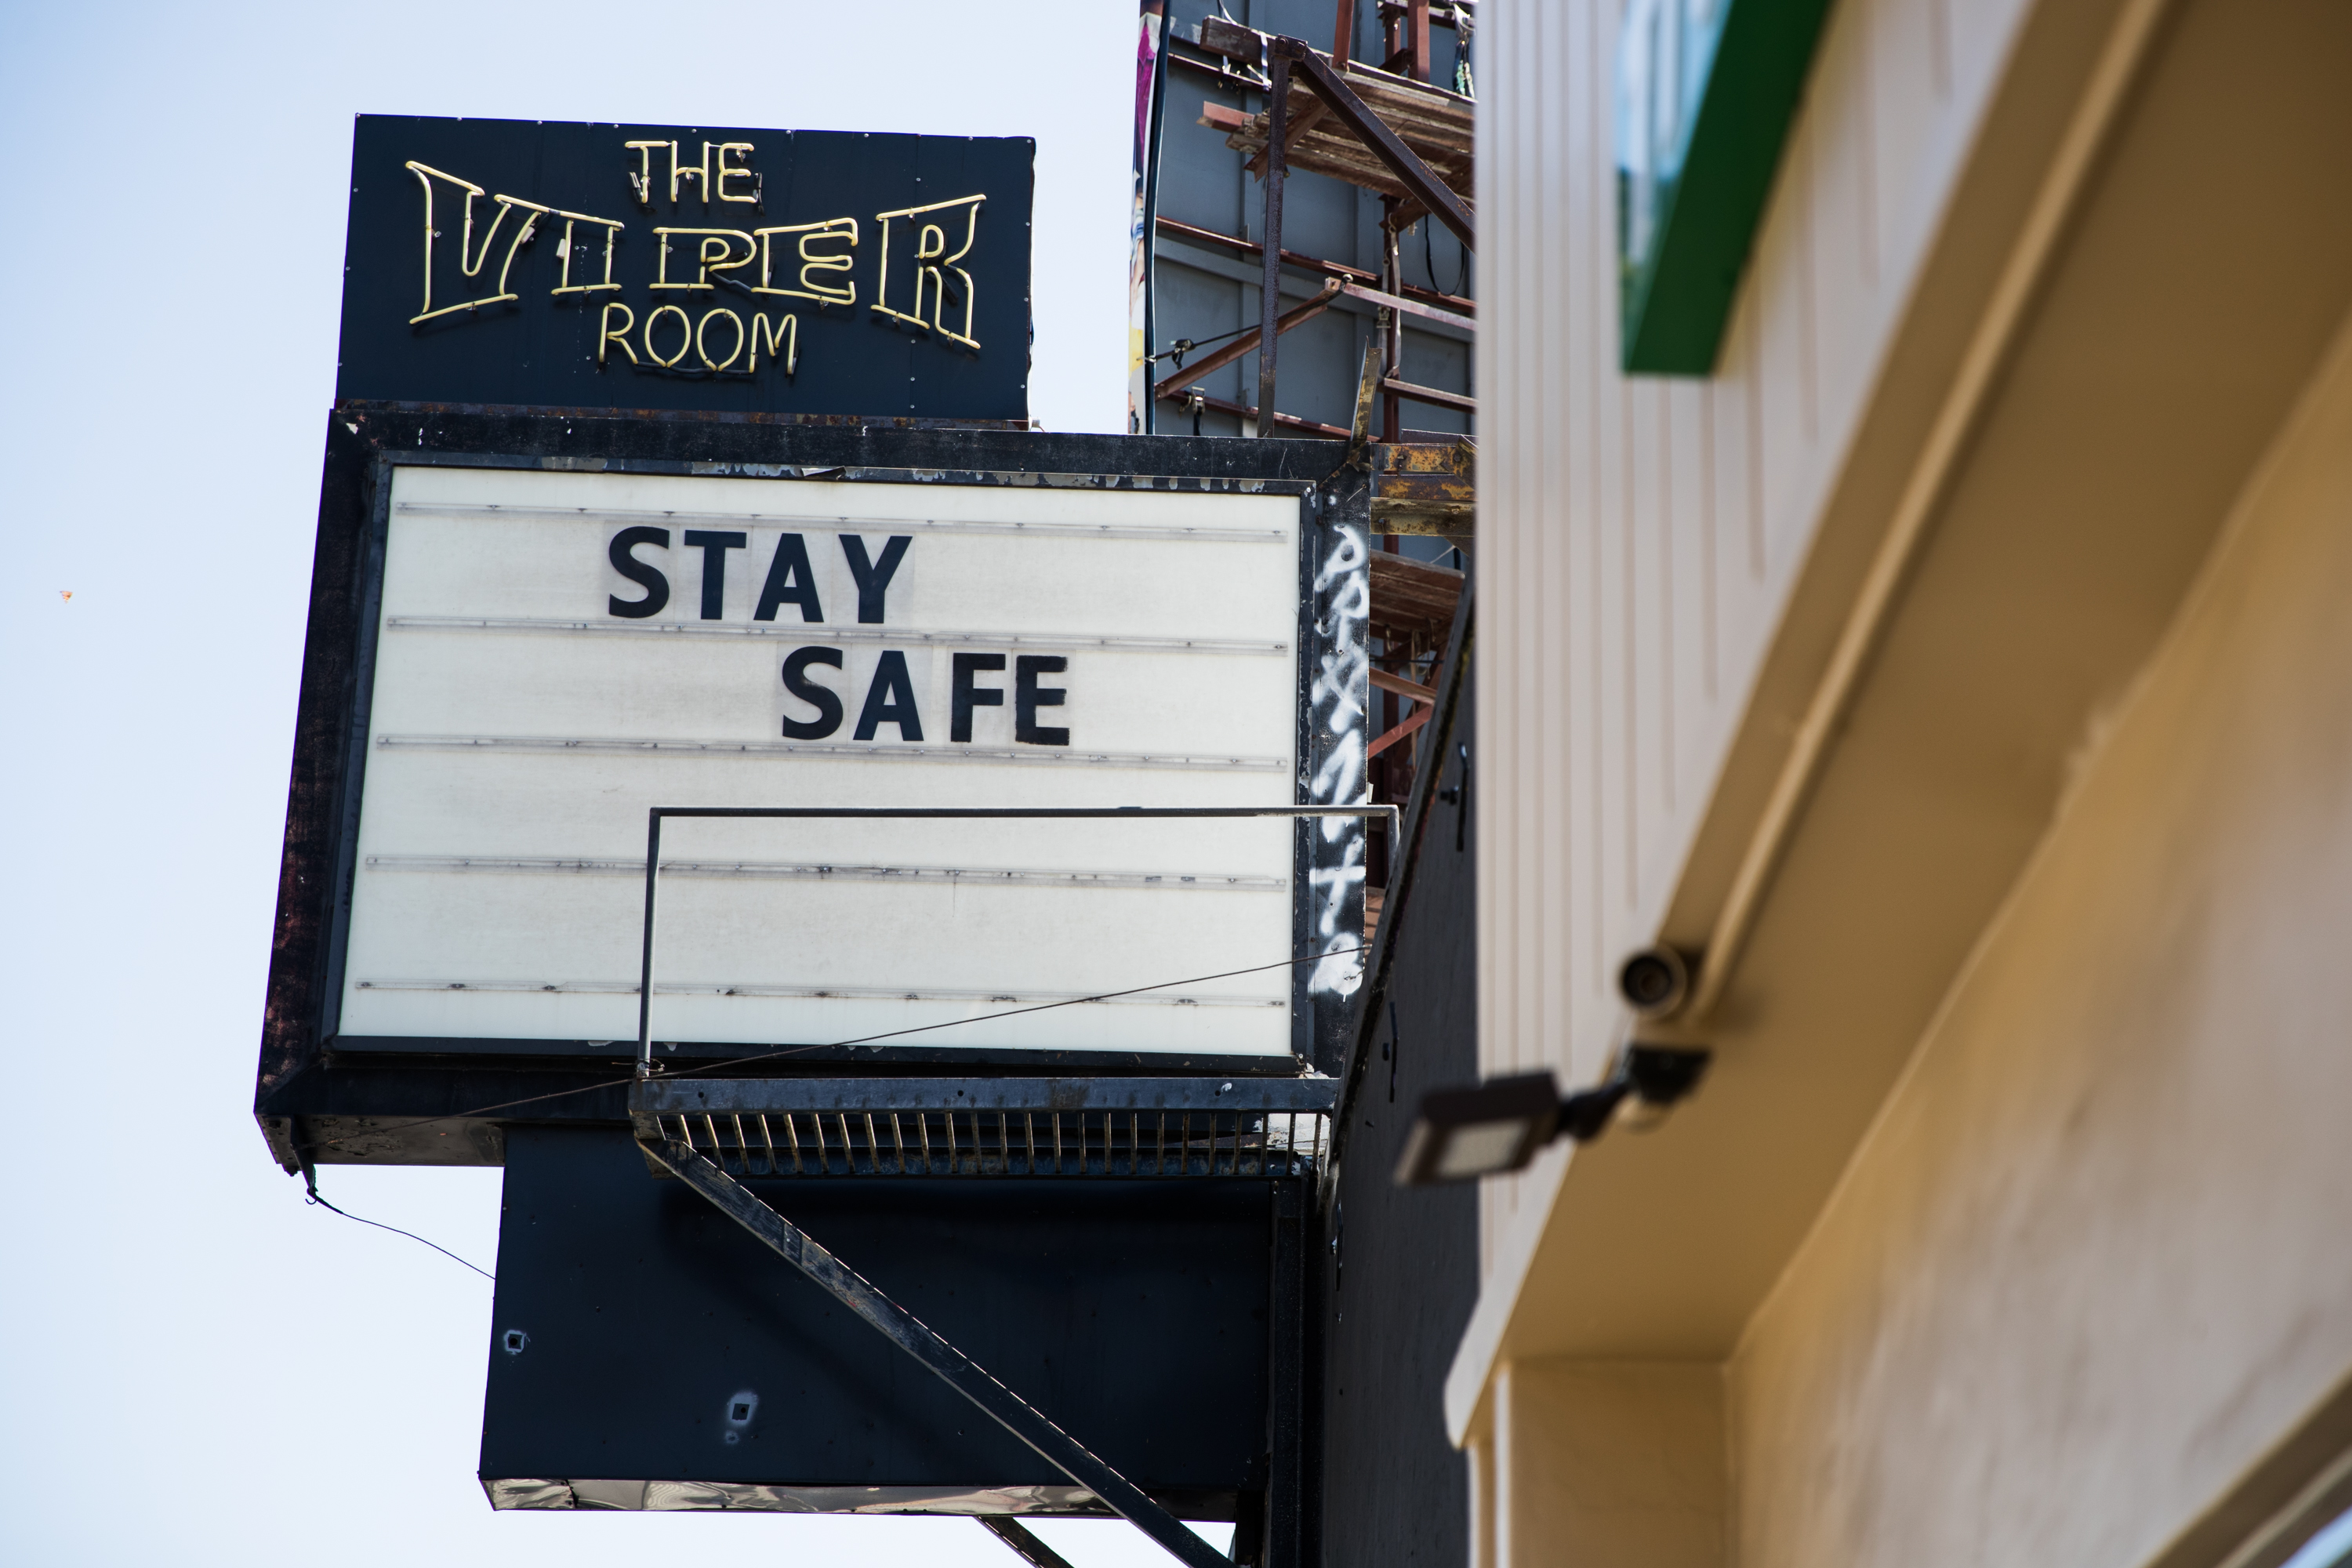 Viper Room closed during the COVID-19 pandemic